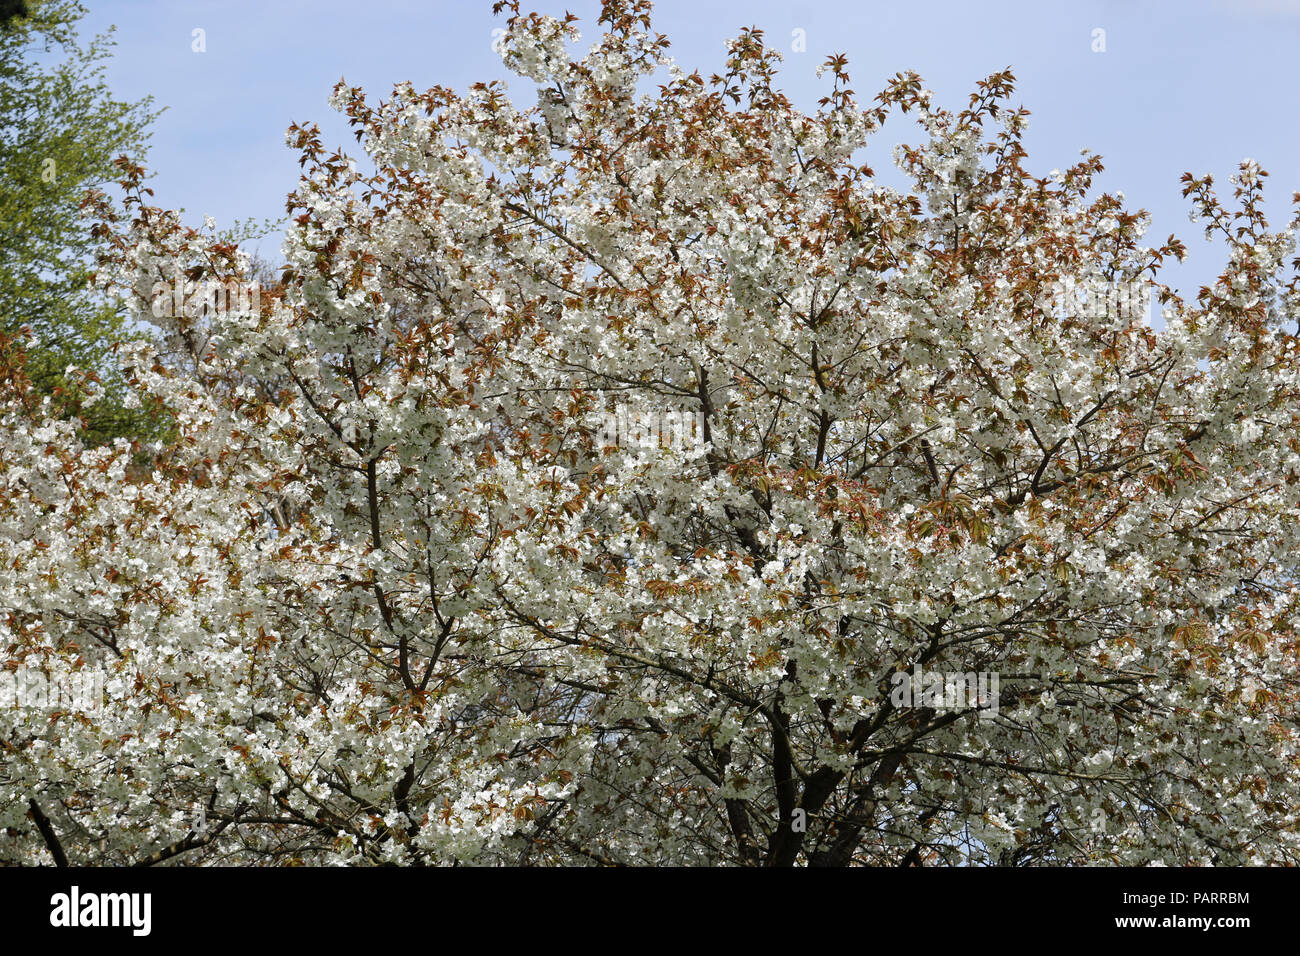 Great white flowered Japanese cherry tree (Prunus serratula) variety Tai haku in full flower with bronze coloured young leaves in springtime and trees Stock Photo